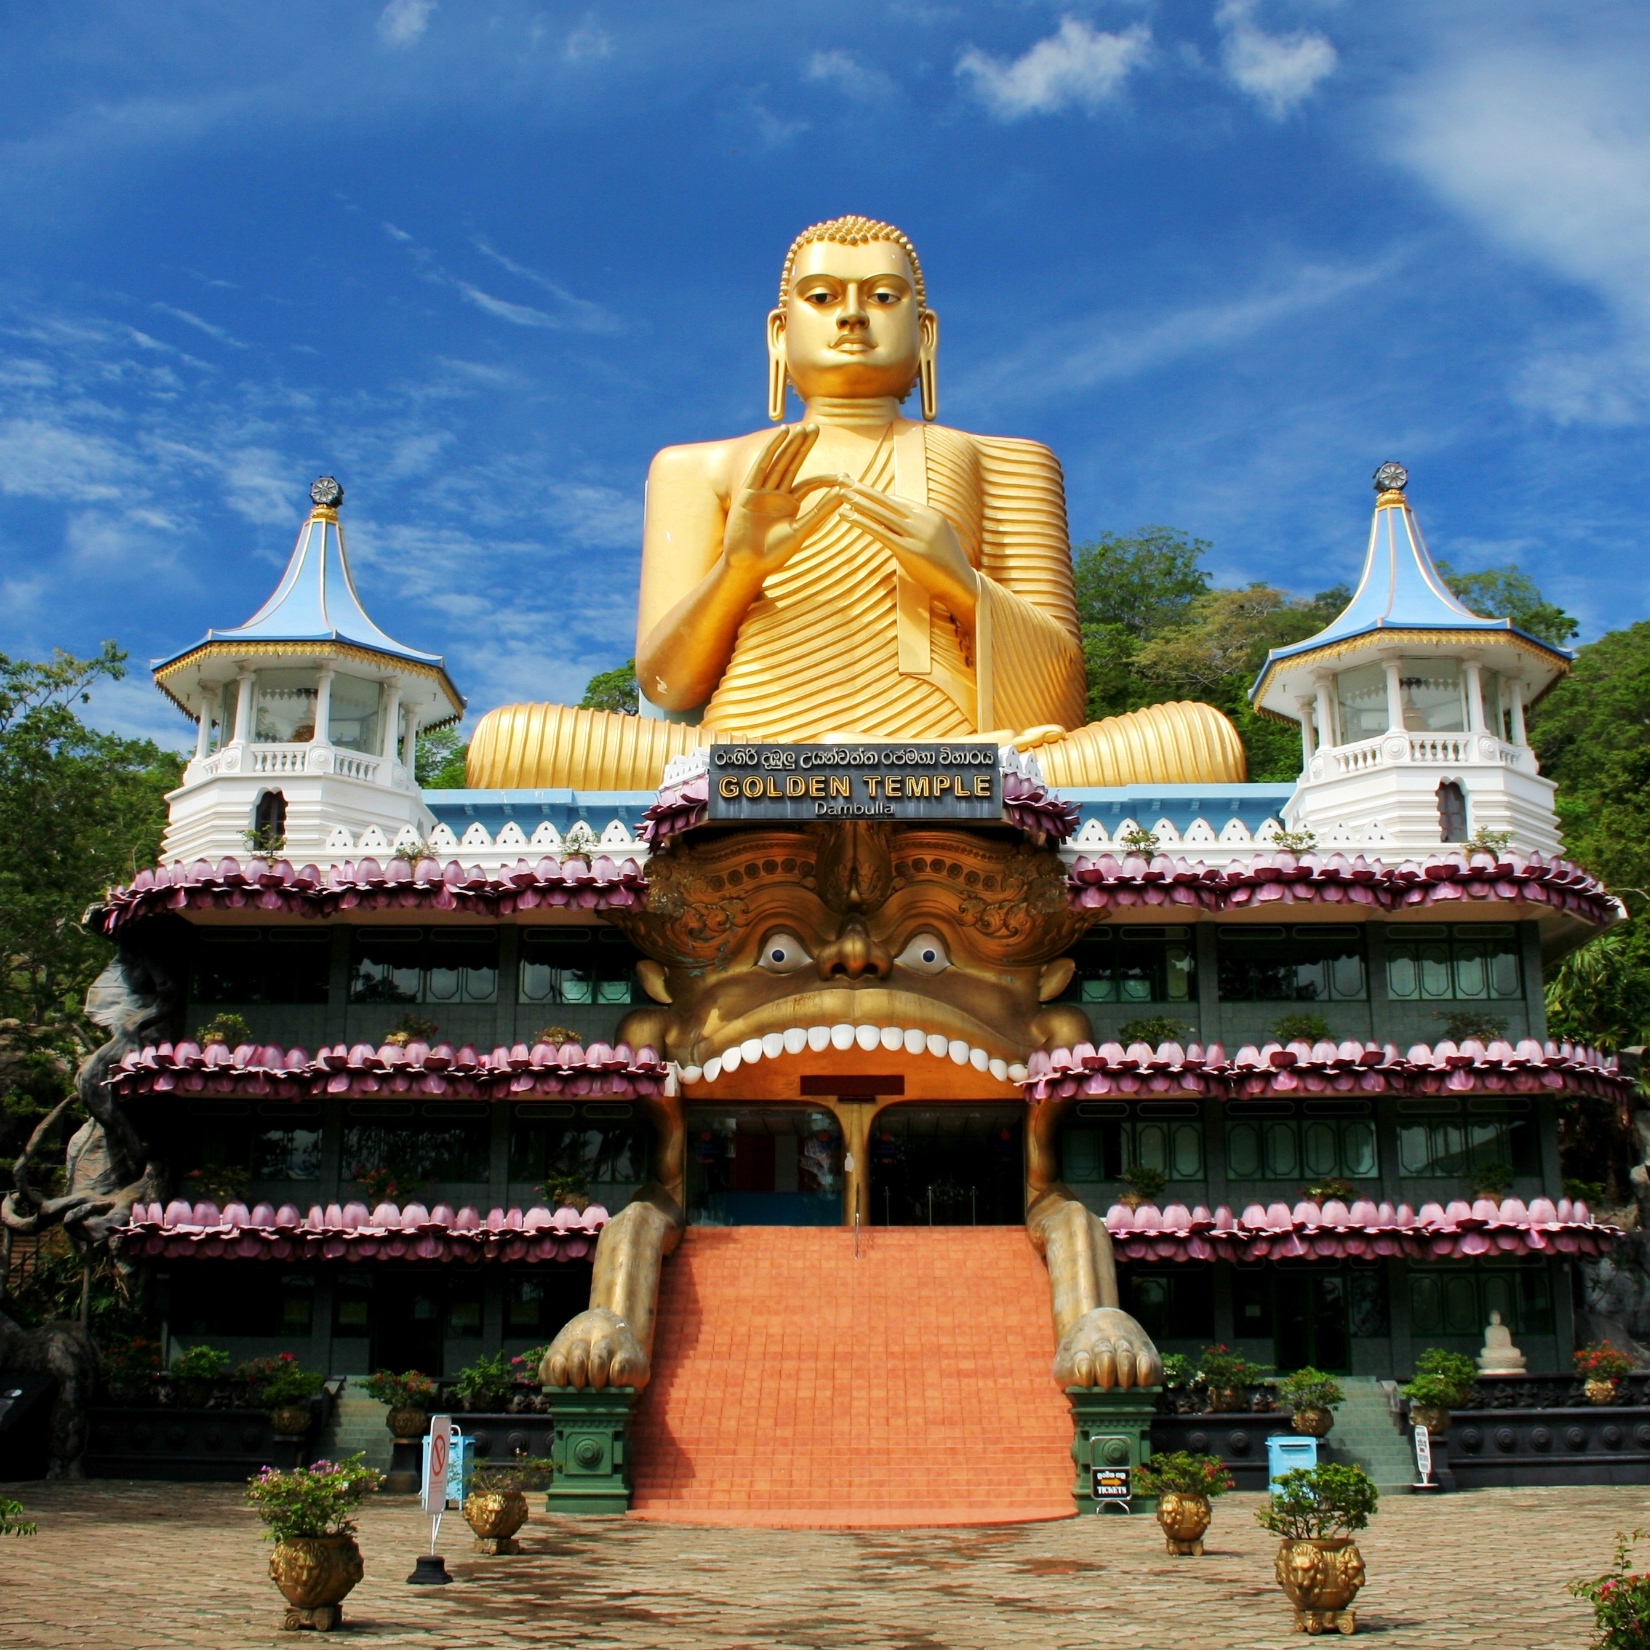 there is a large buddha statue in front of a building